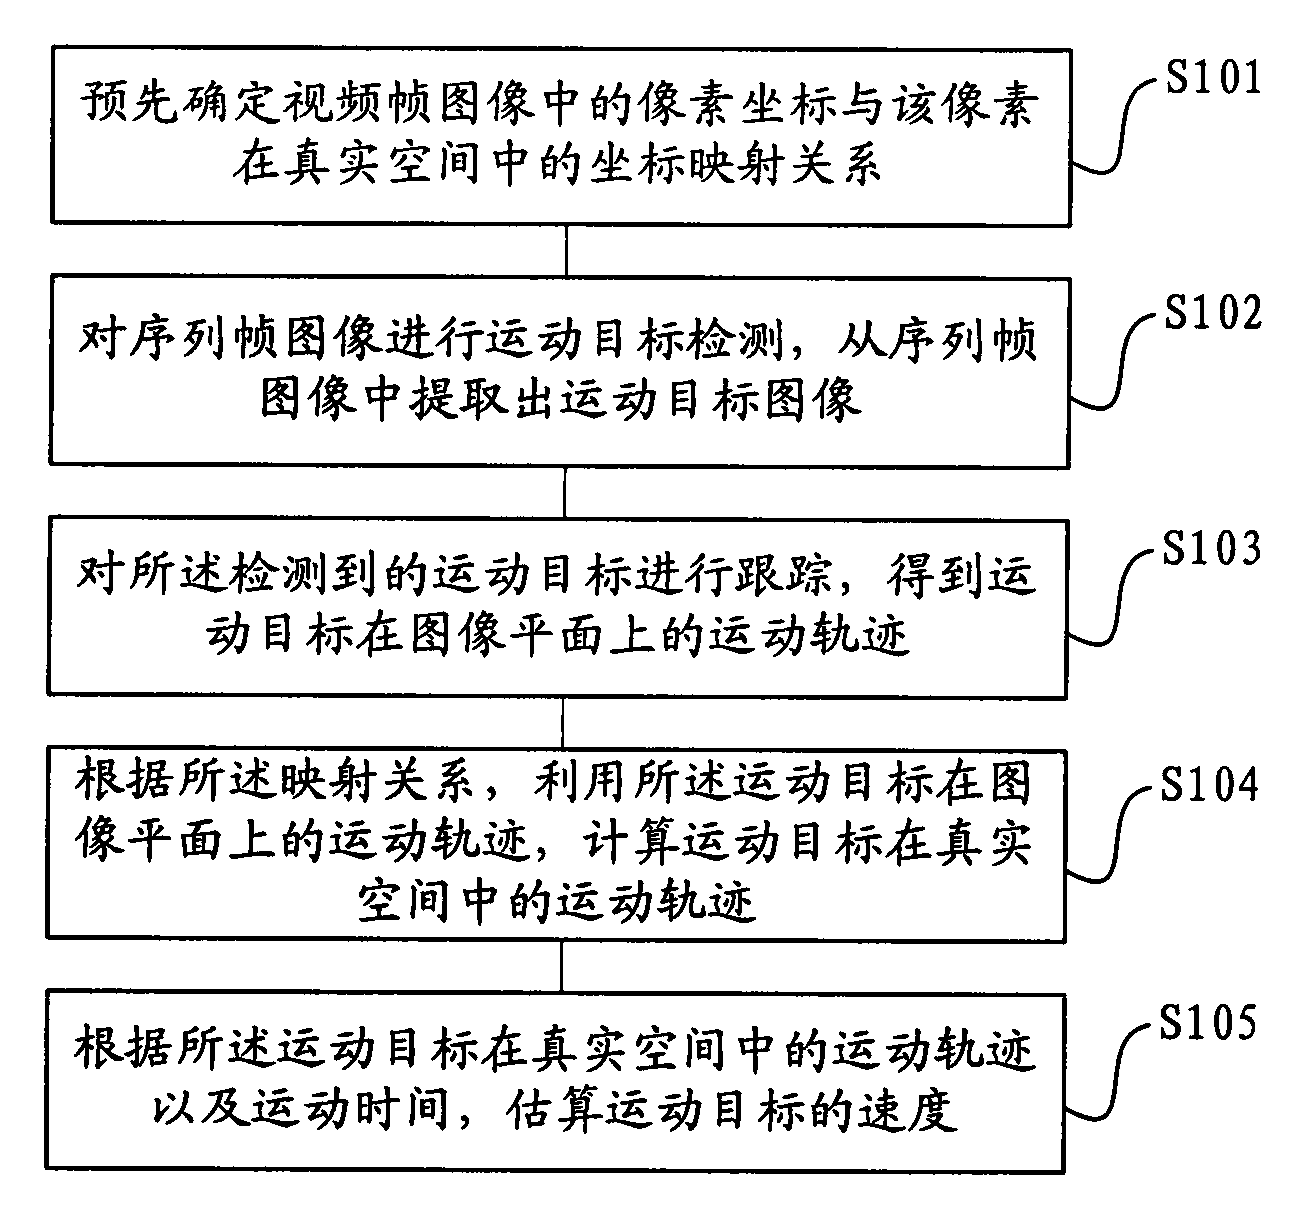 Method and system for measuring speed of moving targets